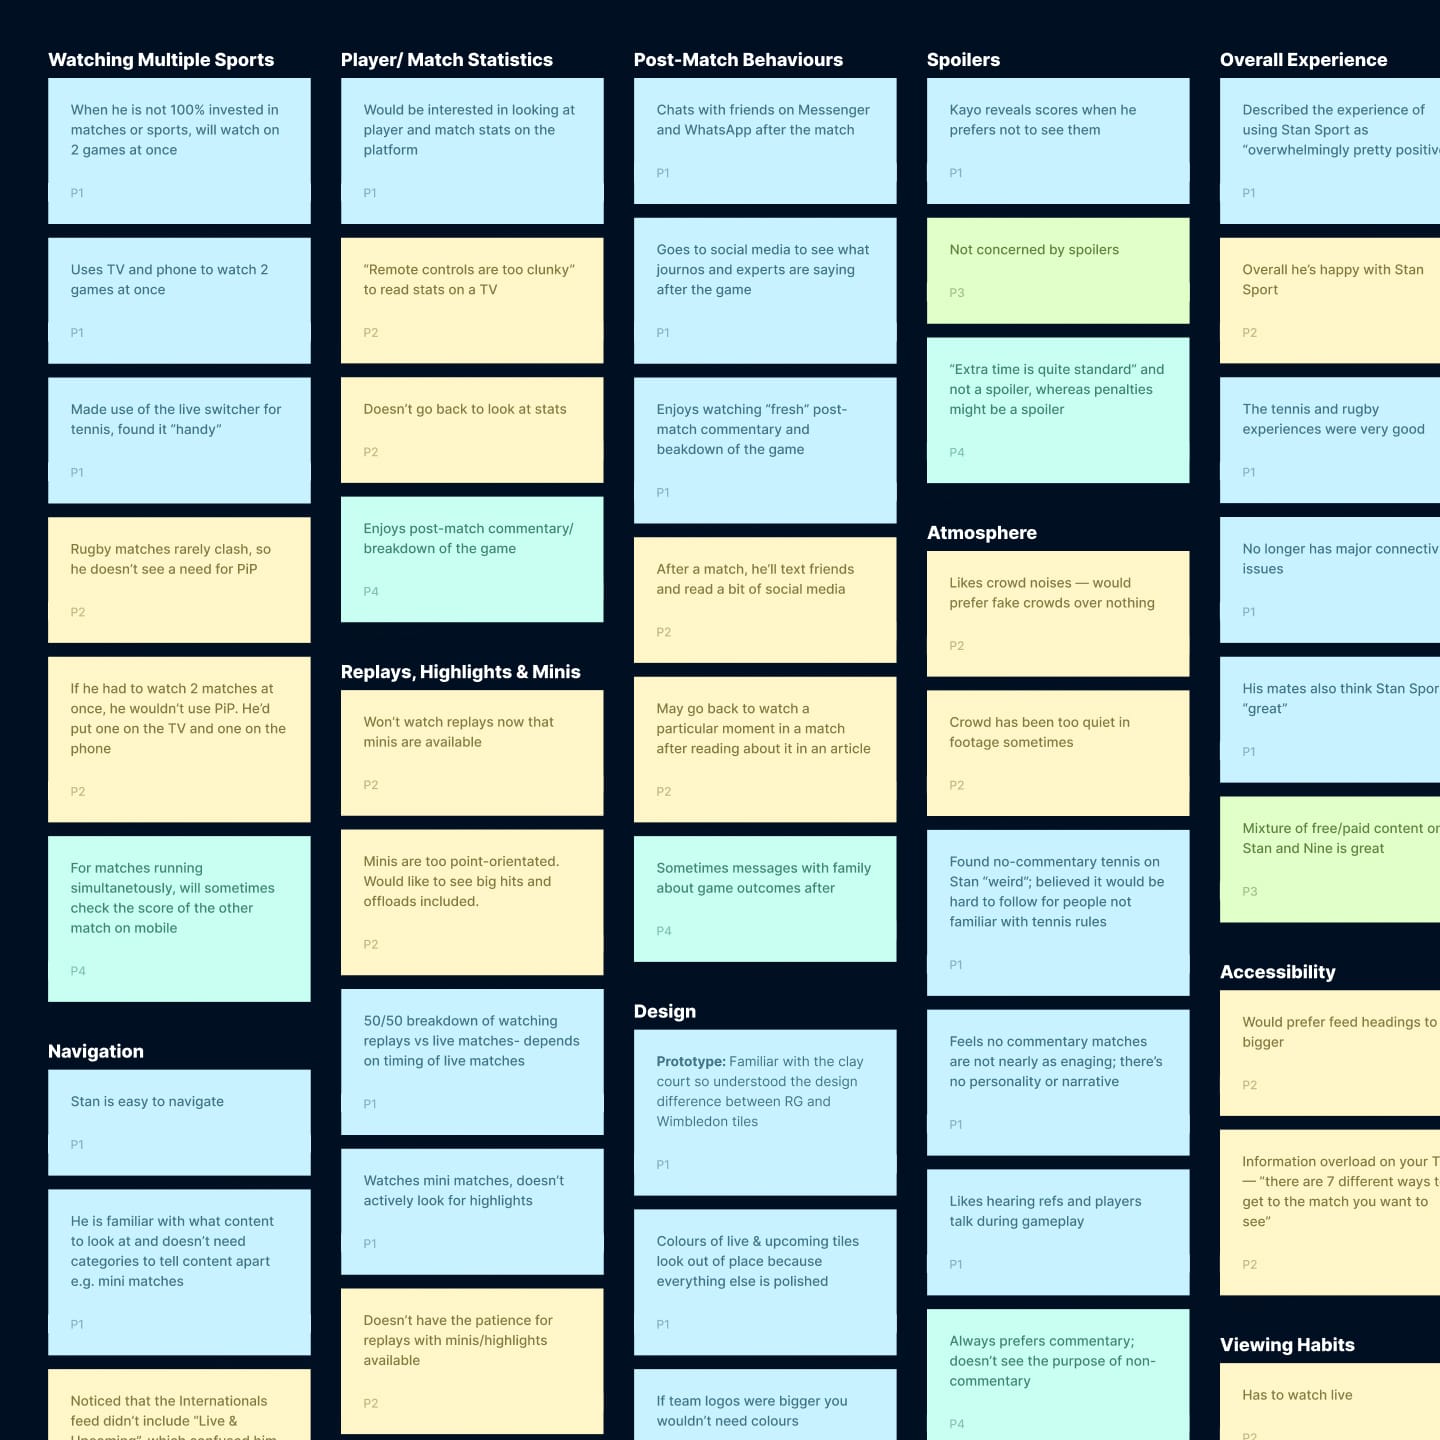 Affinity mapping of insights from user interviews